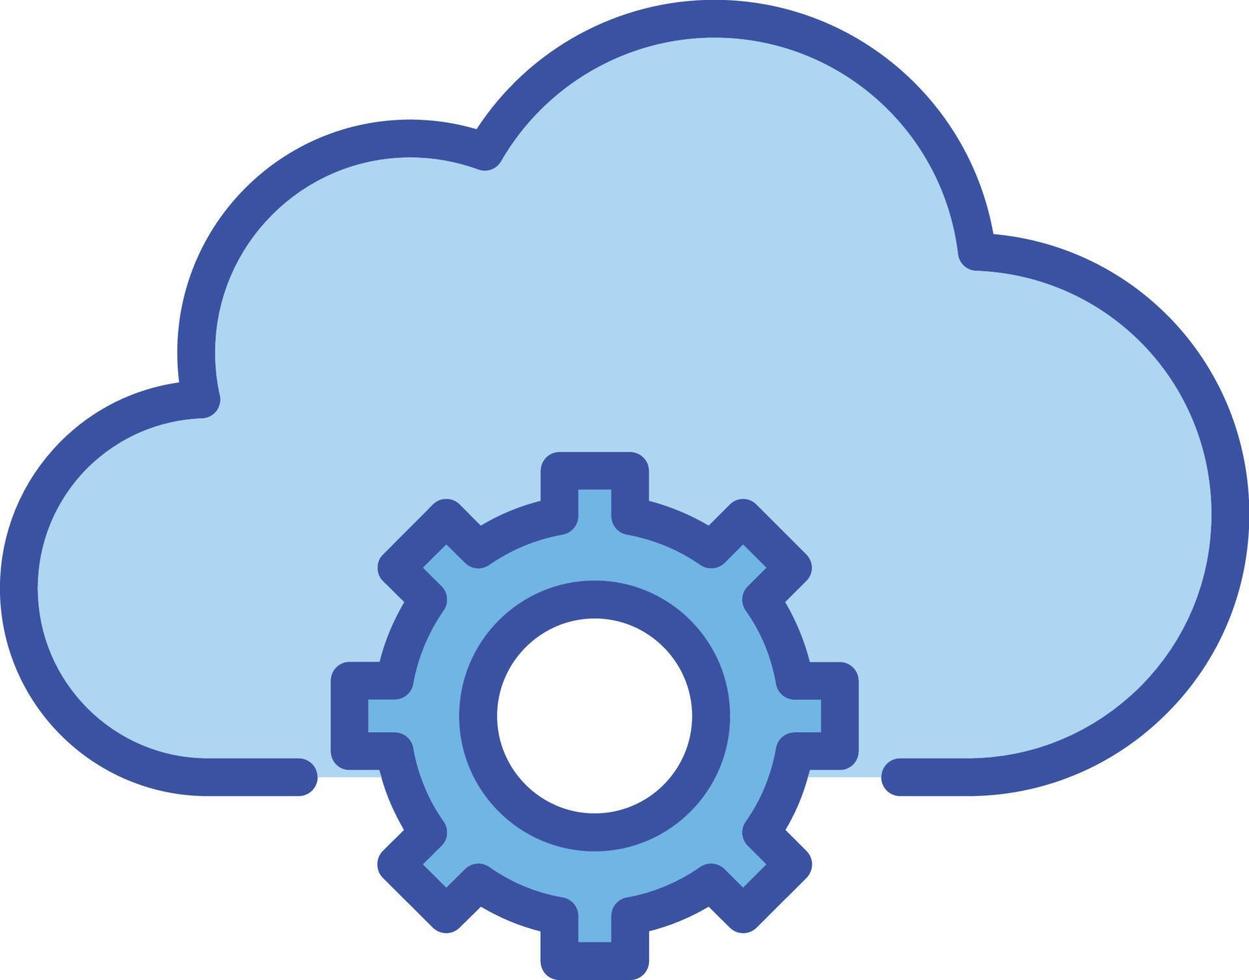 Cloud Setting Isolated Vector icon which can easily modify or edit